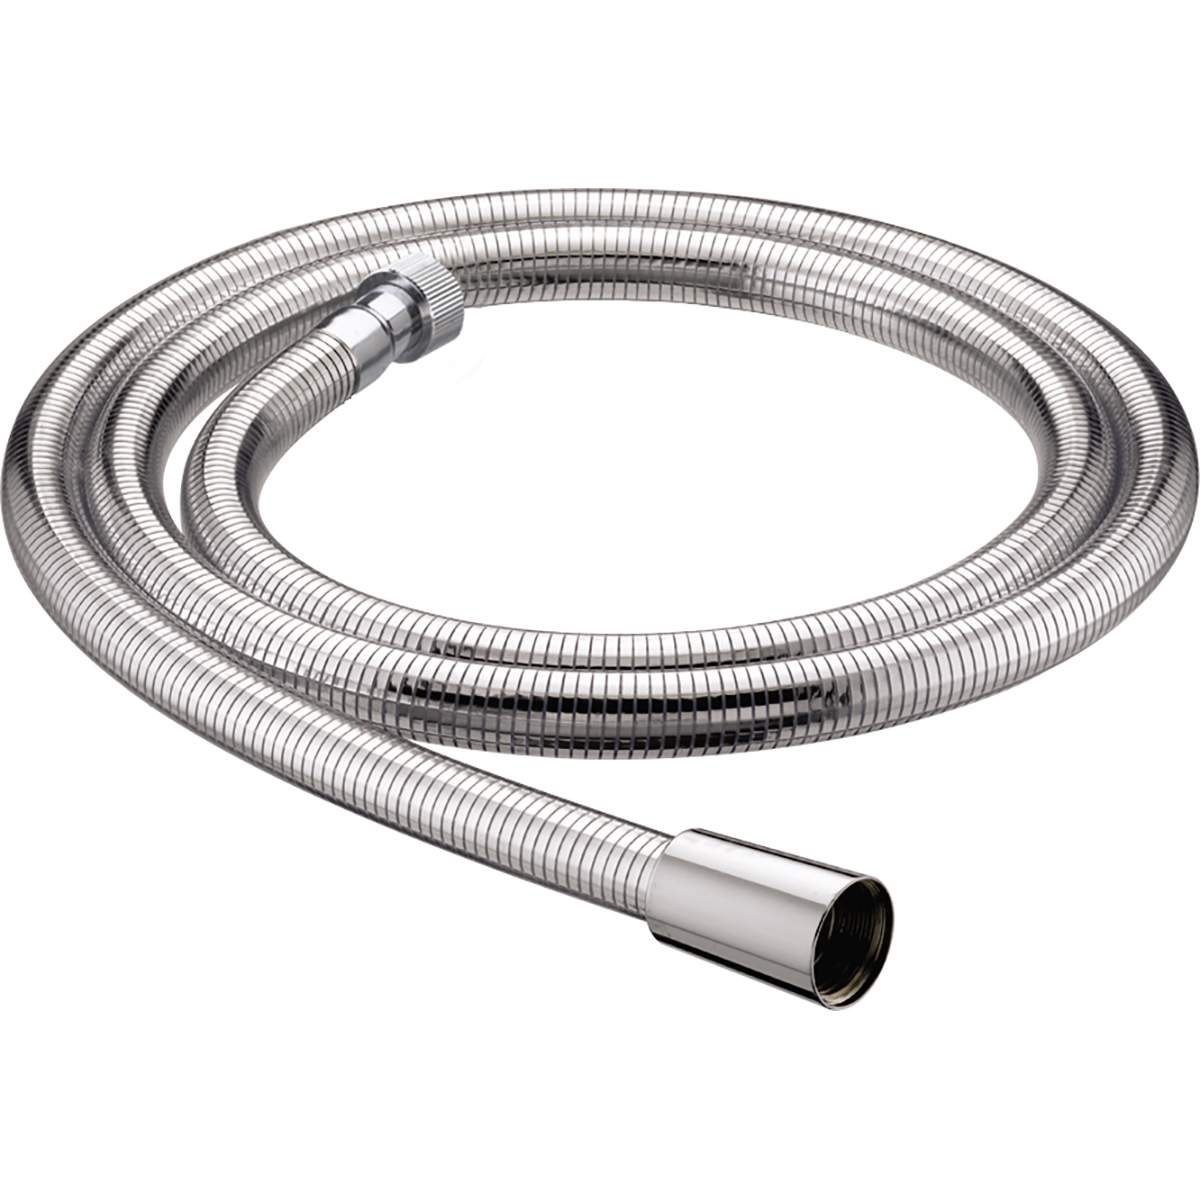 Bristan 1.25m Cone to Nut Easy Clean Shower Hose with 8mm Bore (HOS 125CNE01 C)